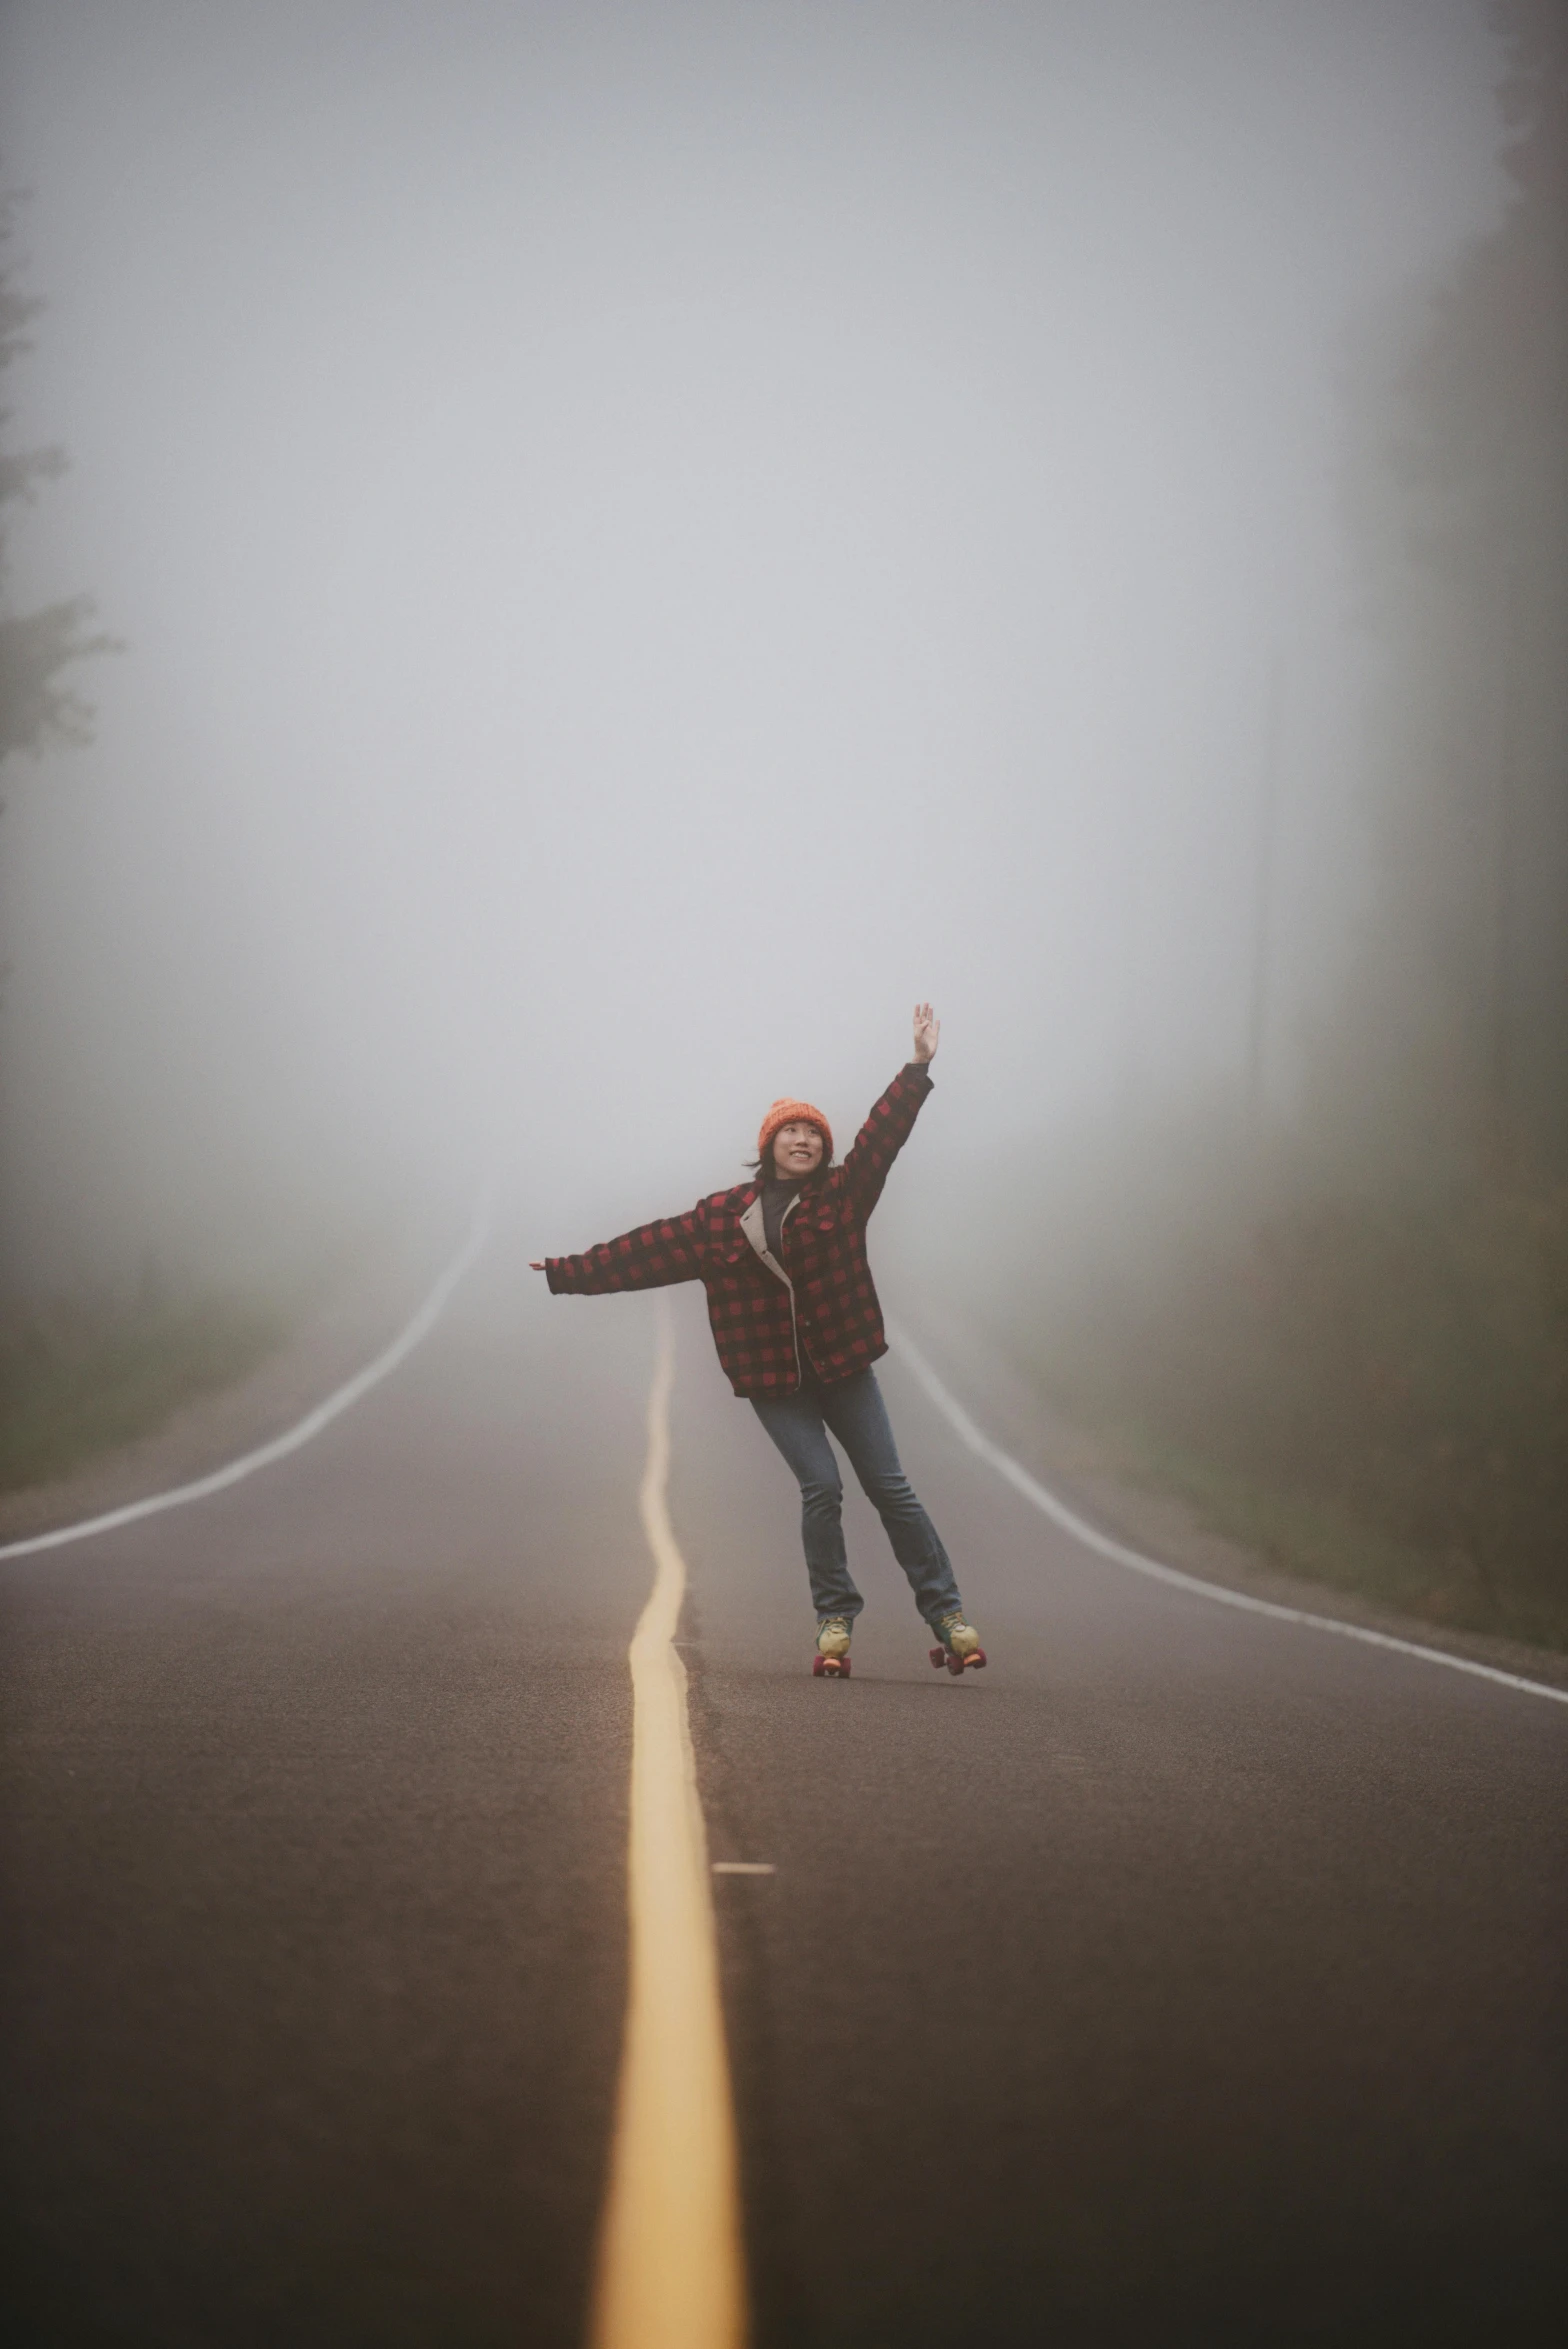 a person riding a skateboard on a foggy road, by Jessie Algie, pose(arms up + happy), twin peaks, misty ghost town, canvas